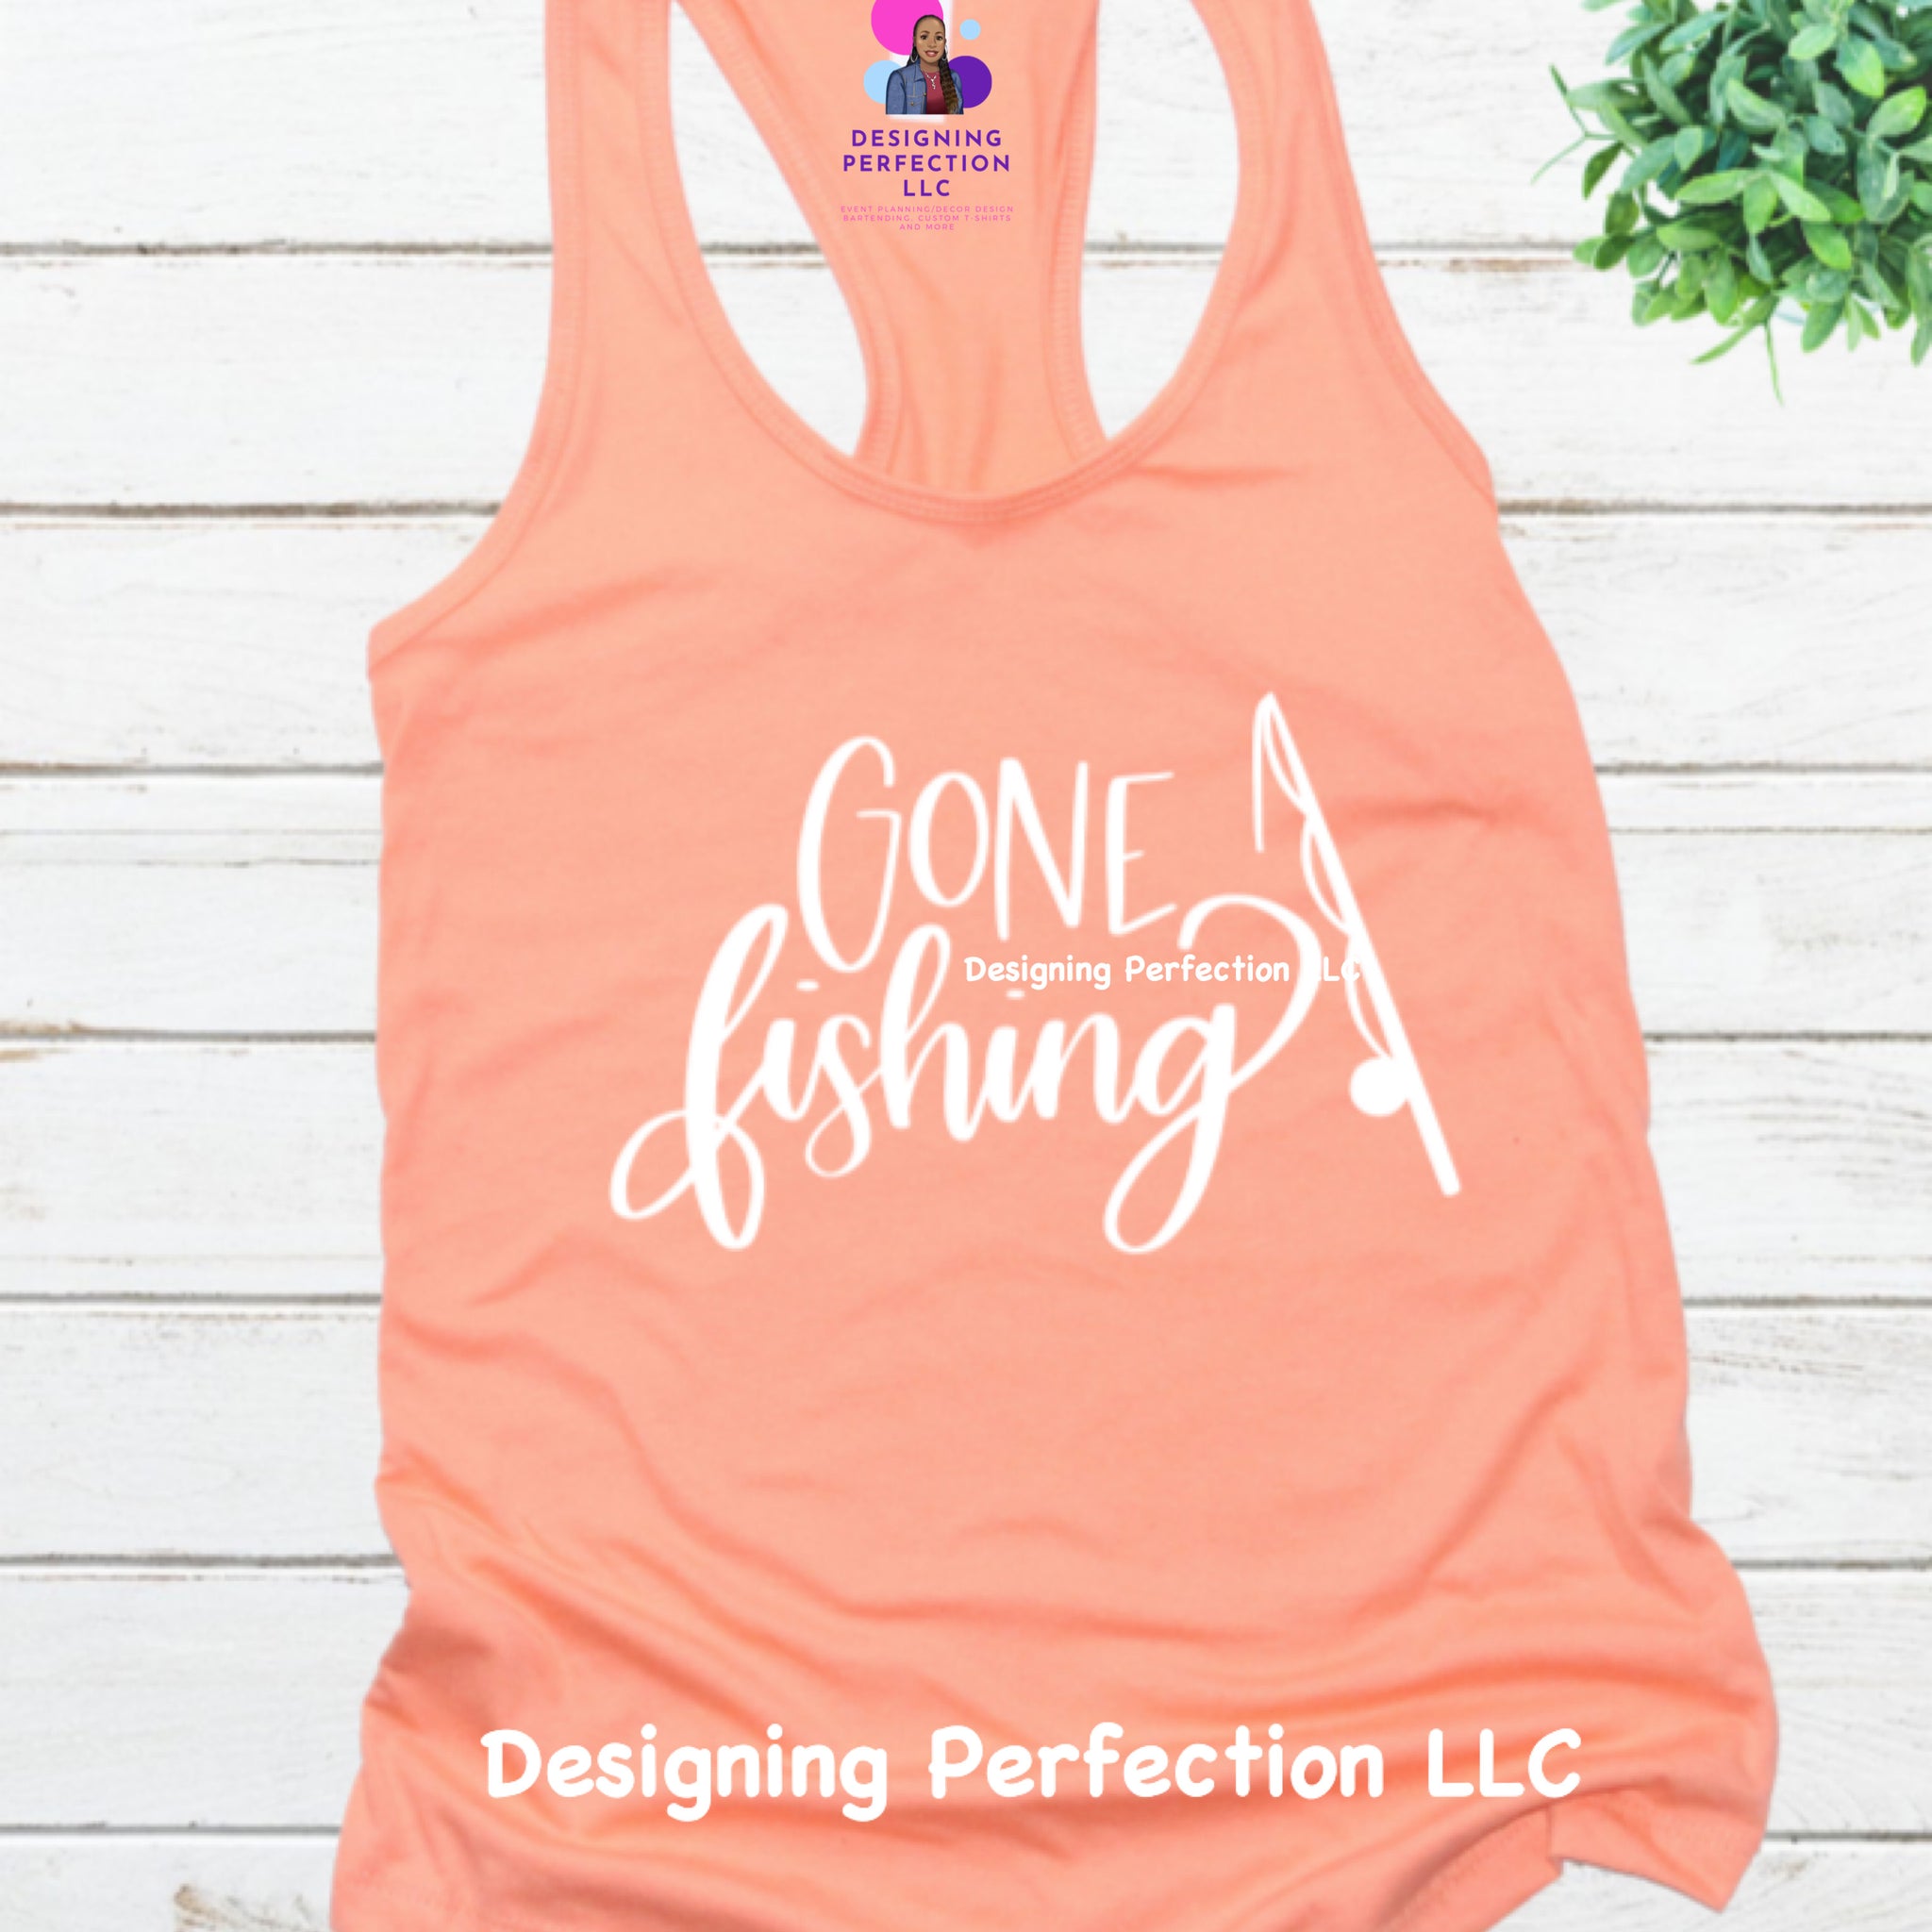 Gone Fishing *HER- priced for a regular tee (10)